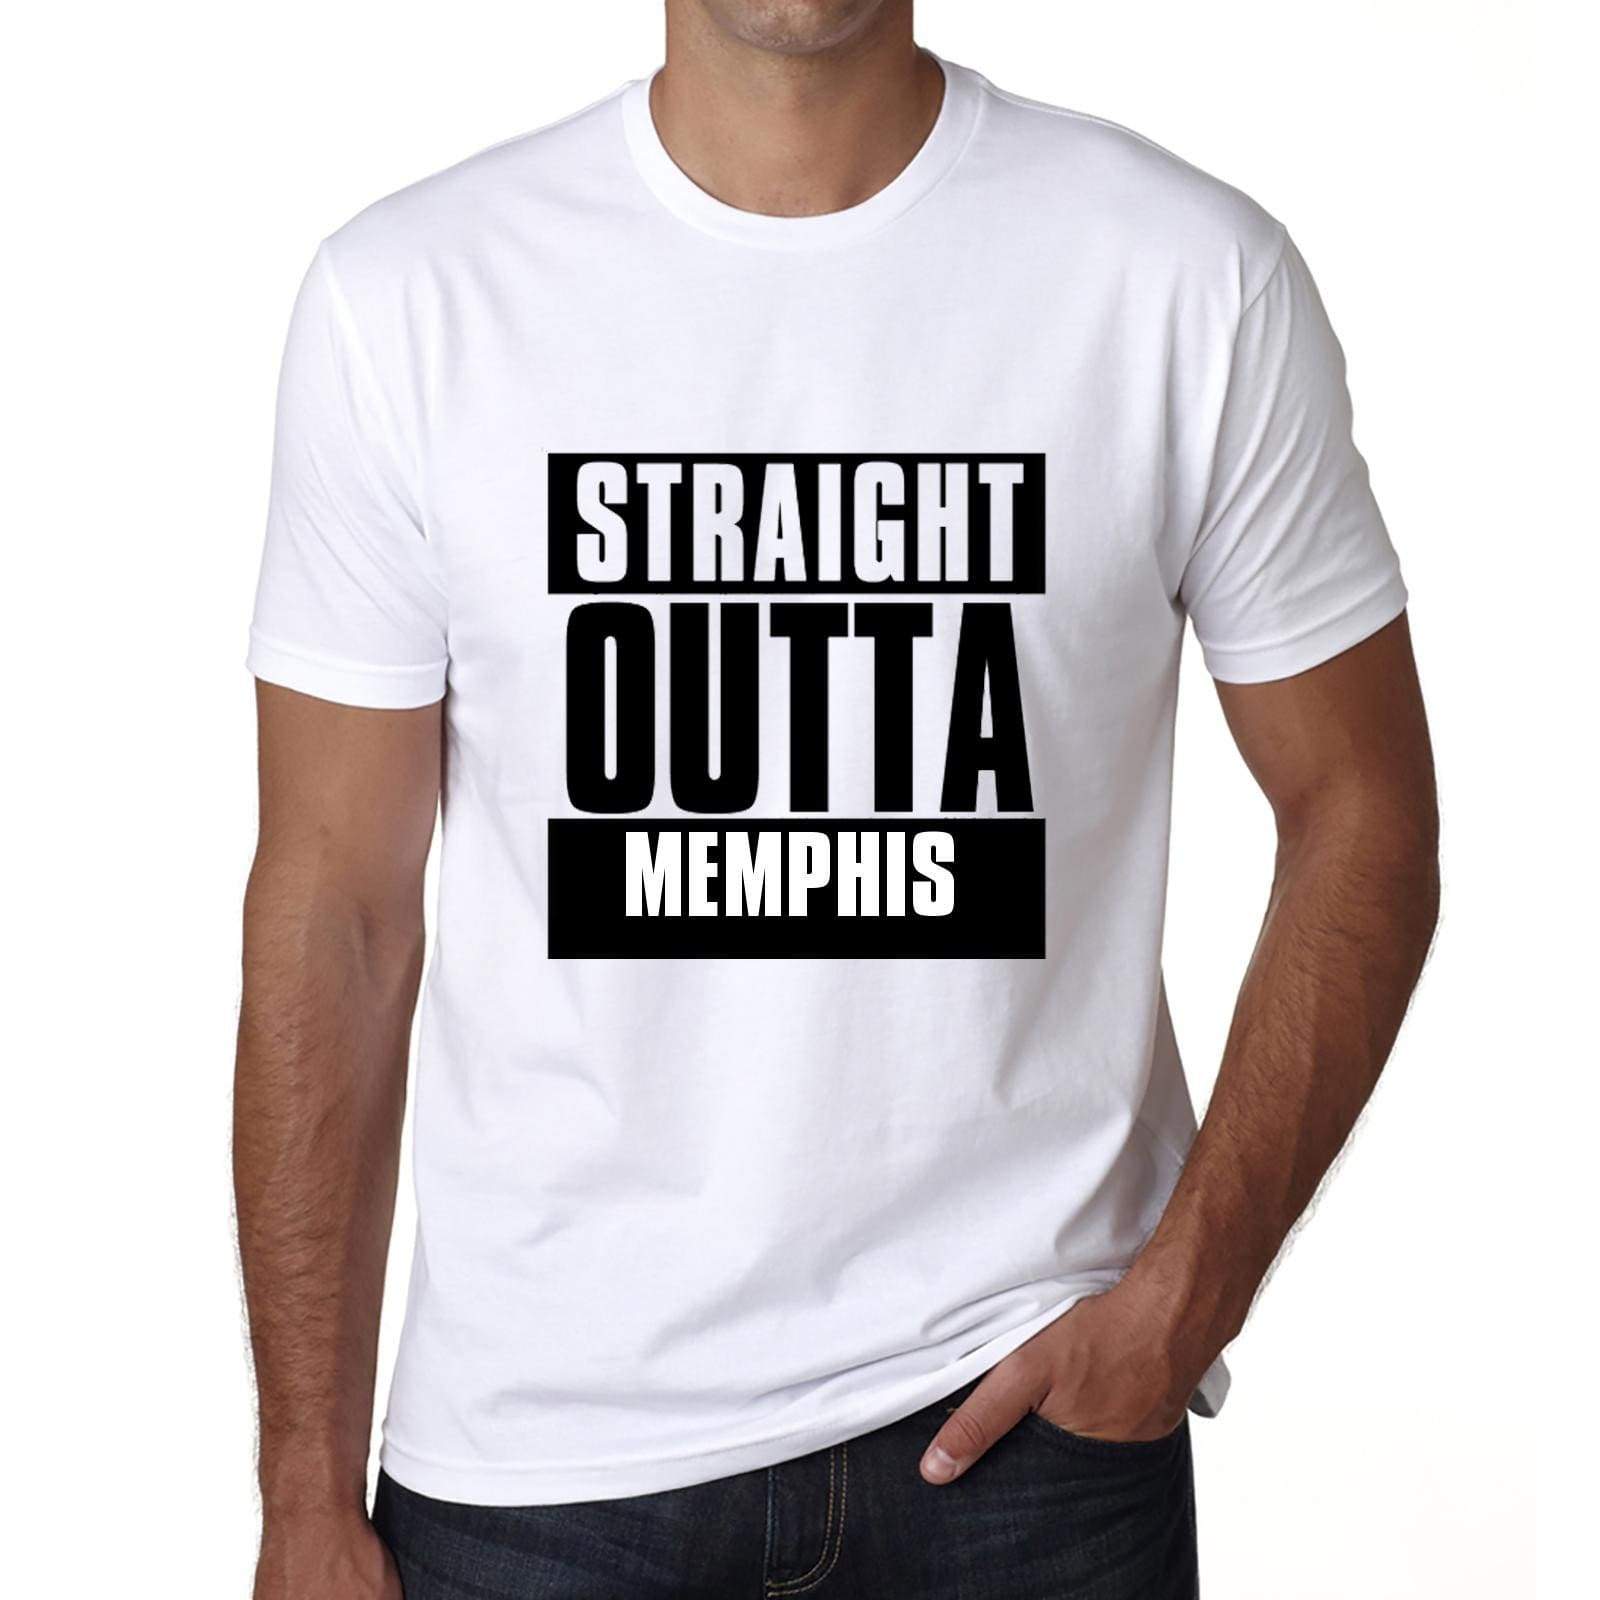 Straight Outta Memphis Mens Short Sleeve Round Neck T-Shirt 00027 - White / S - Casual